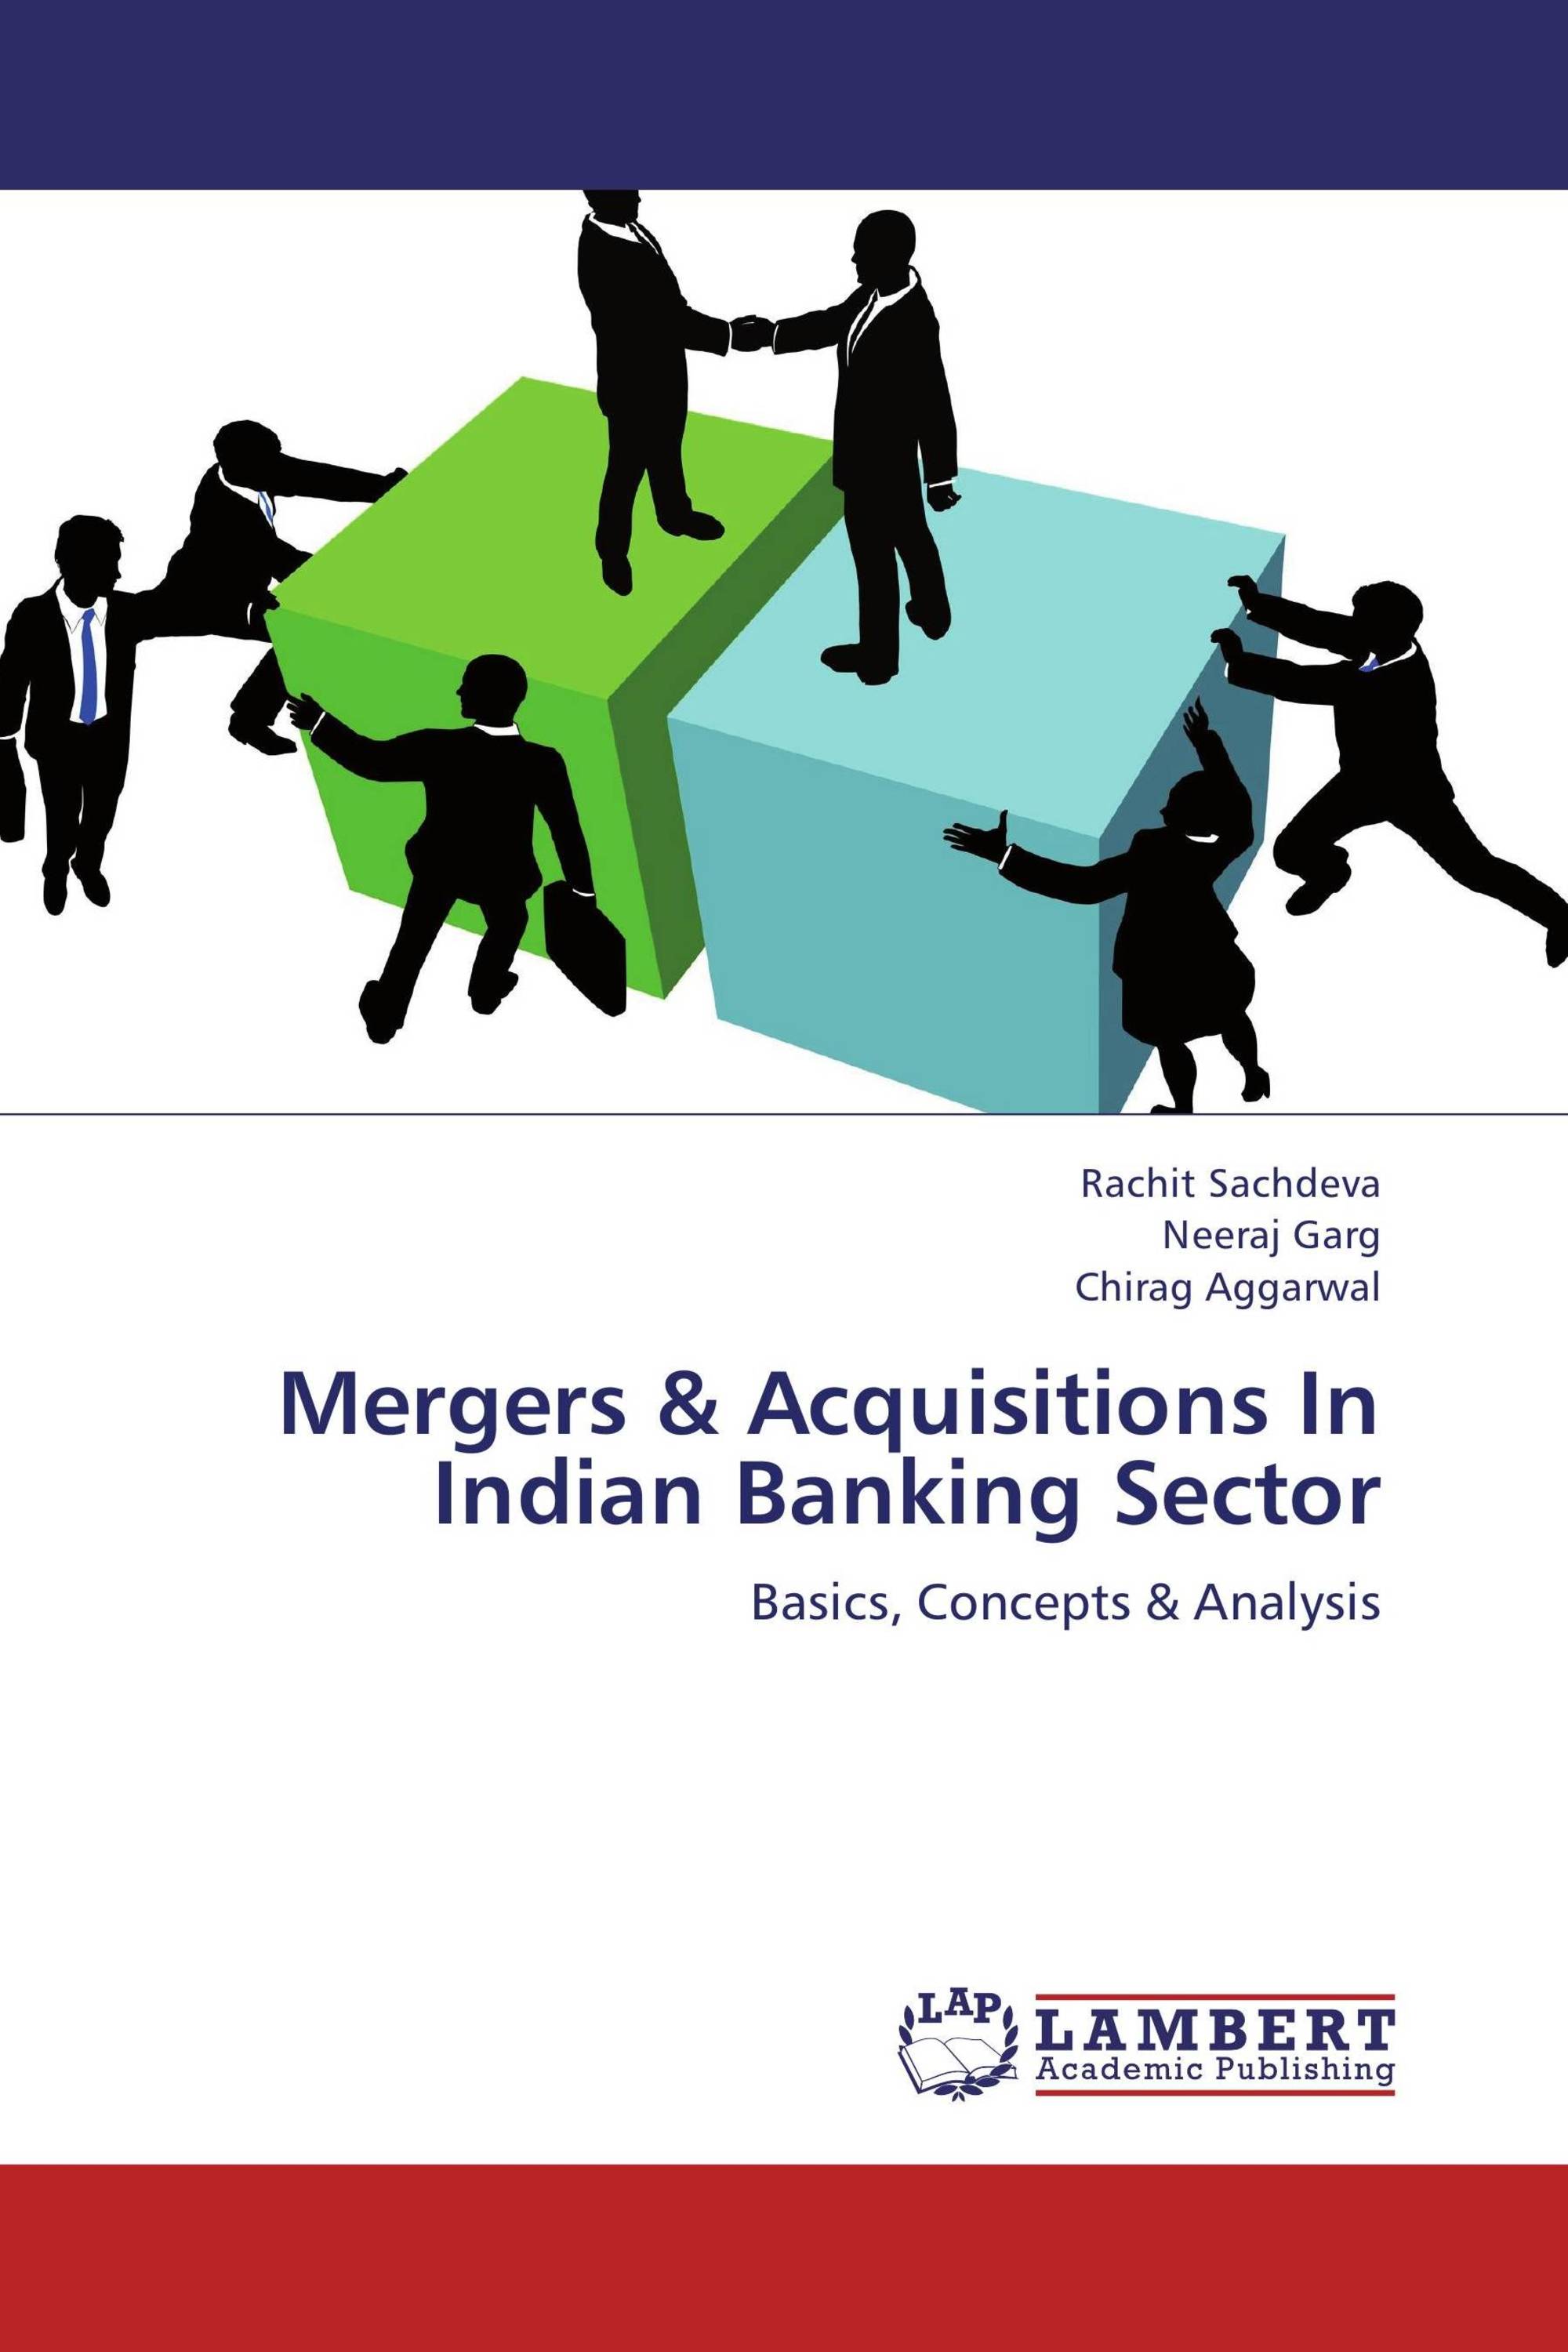 case study on merger and acquisition